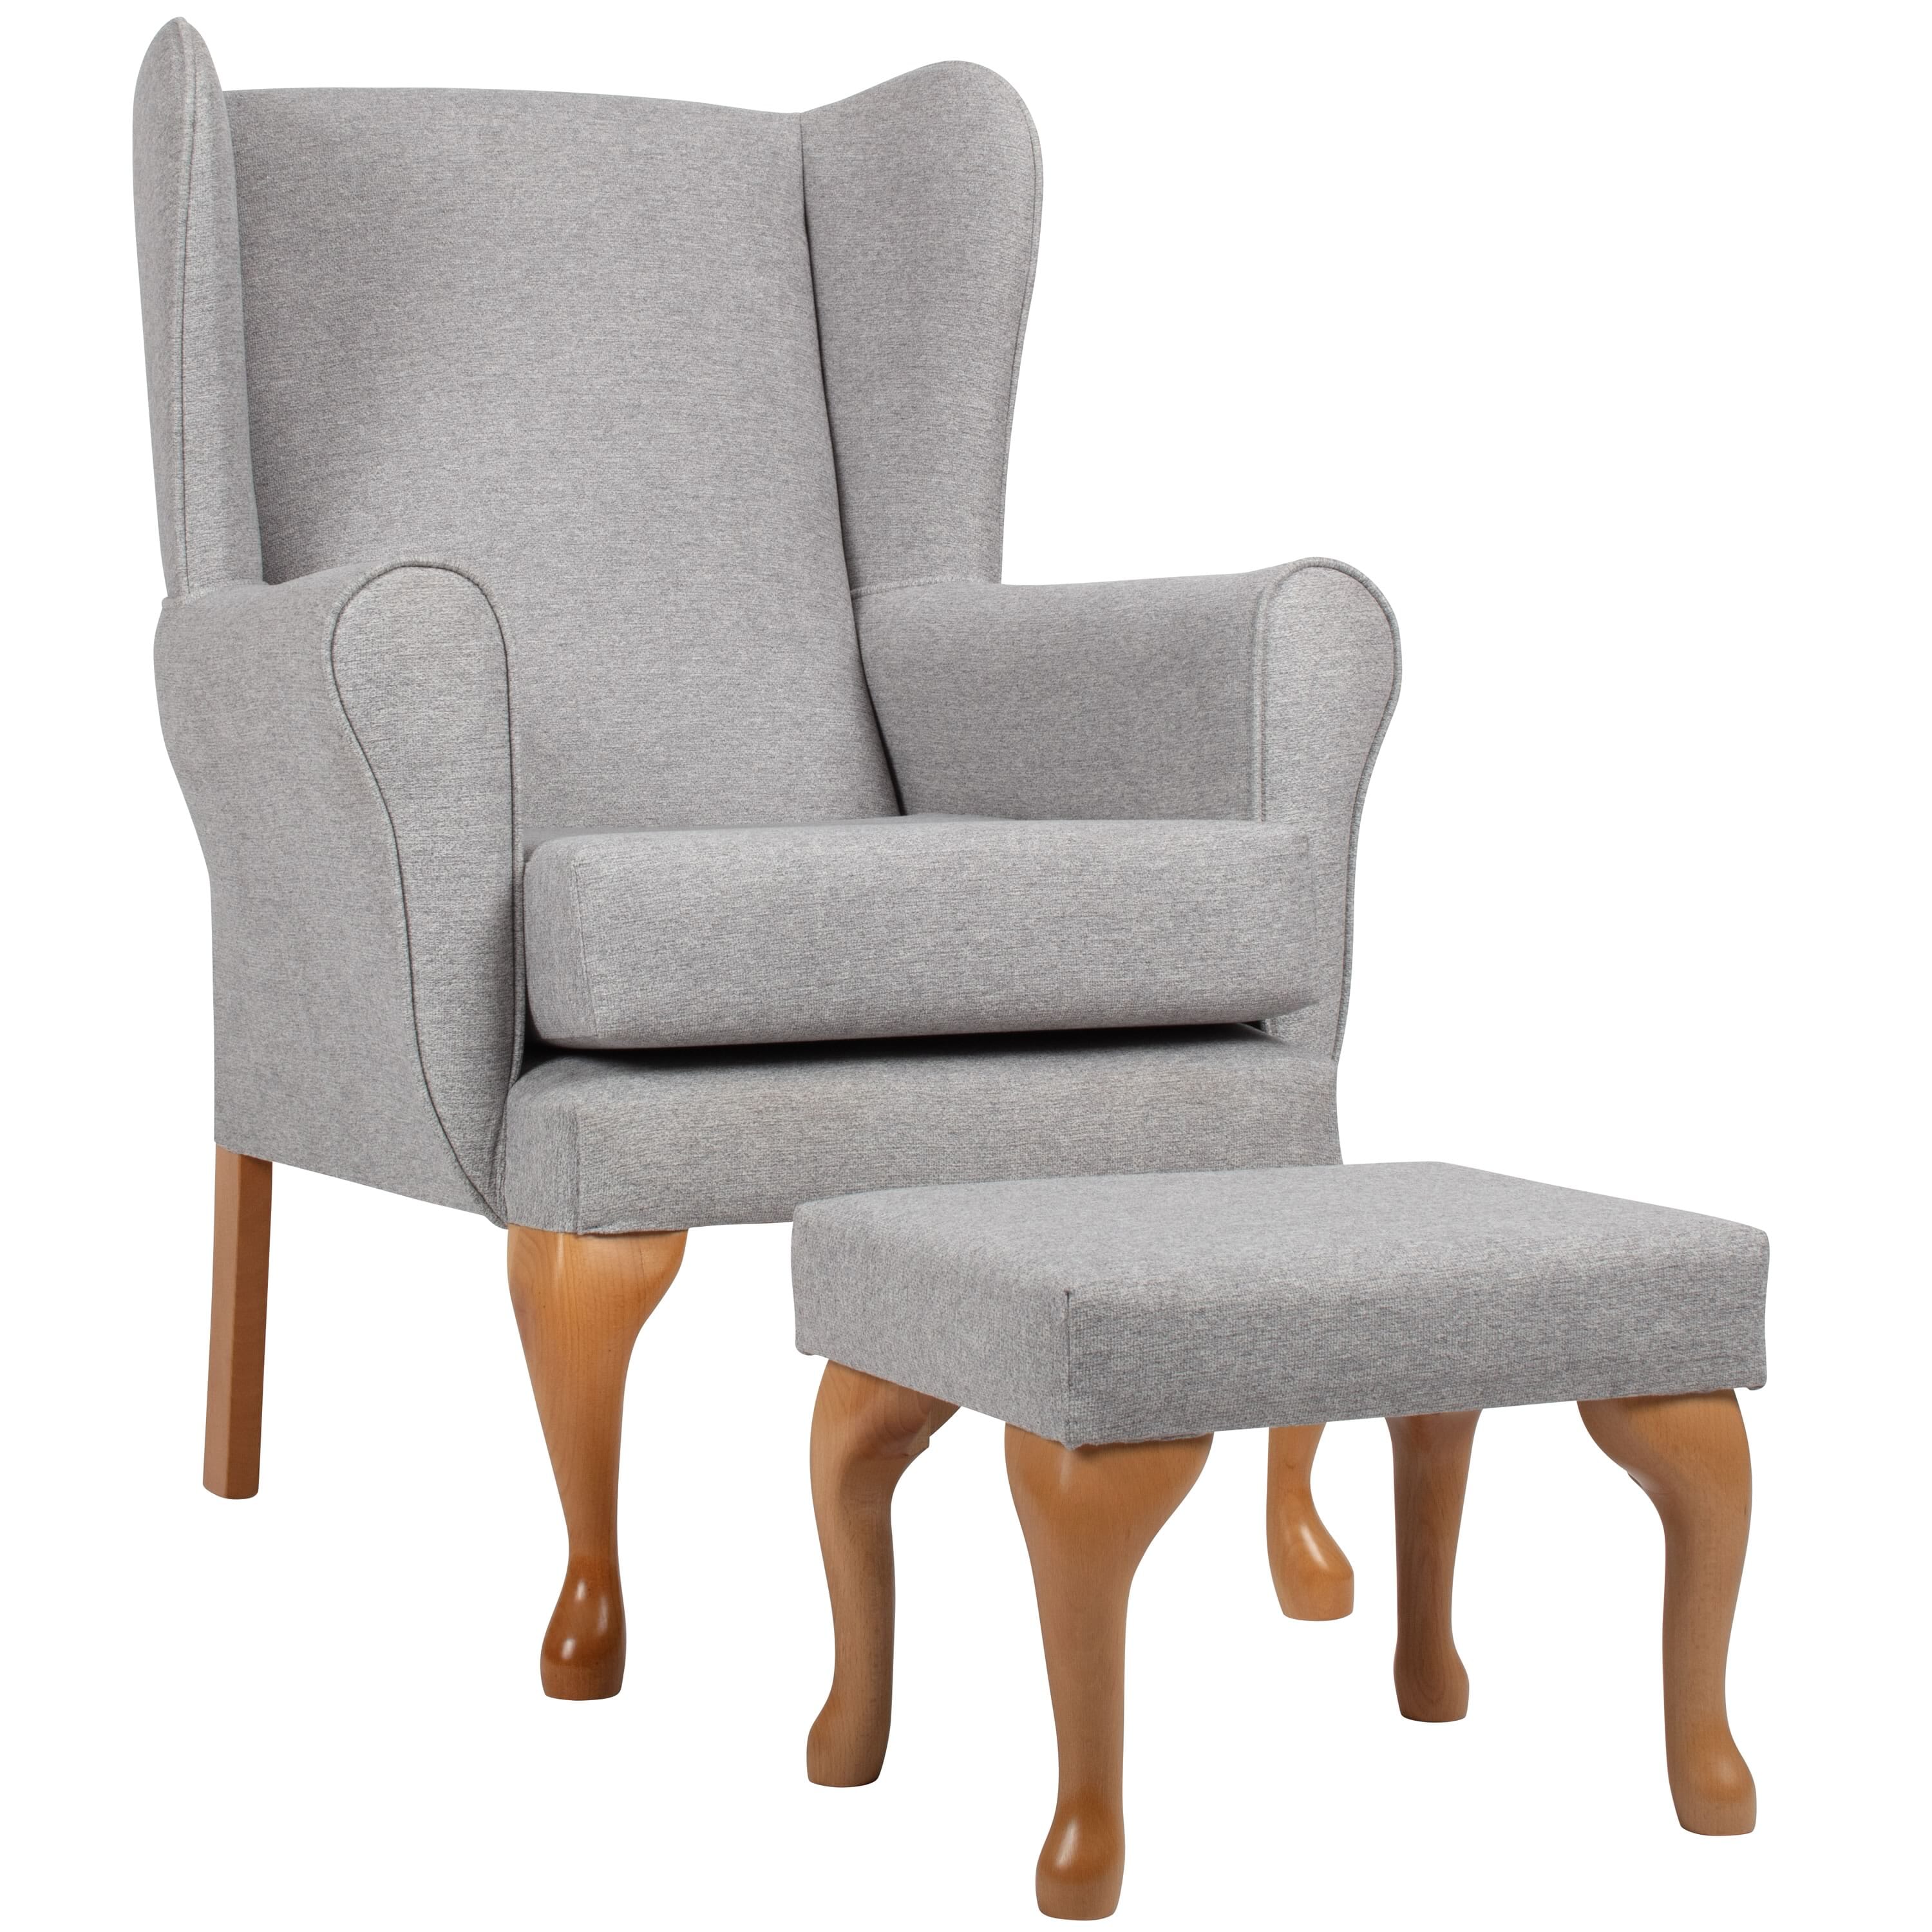 View Queen Anne Fireside Chair with Matching Footstool Grey information